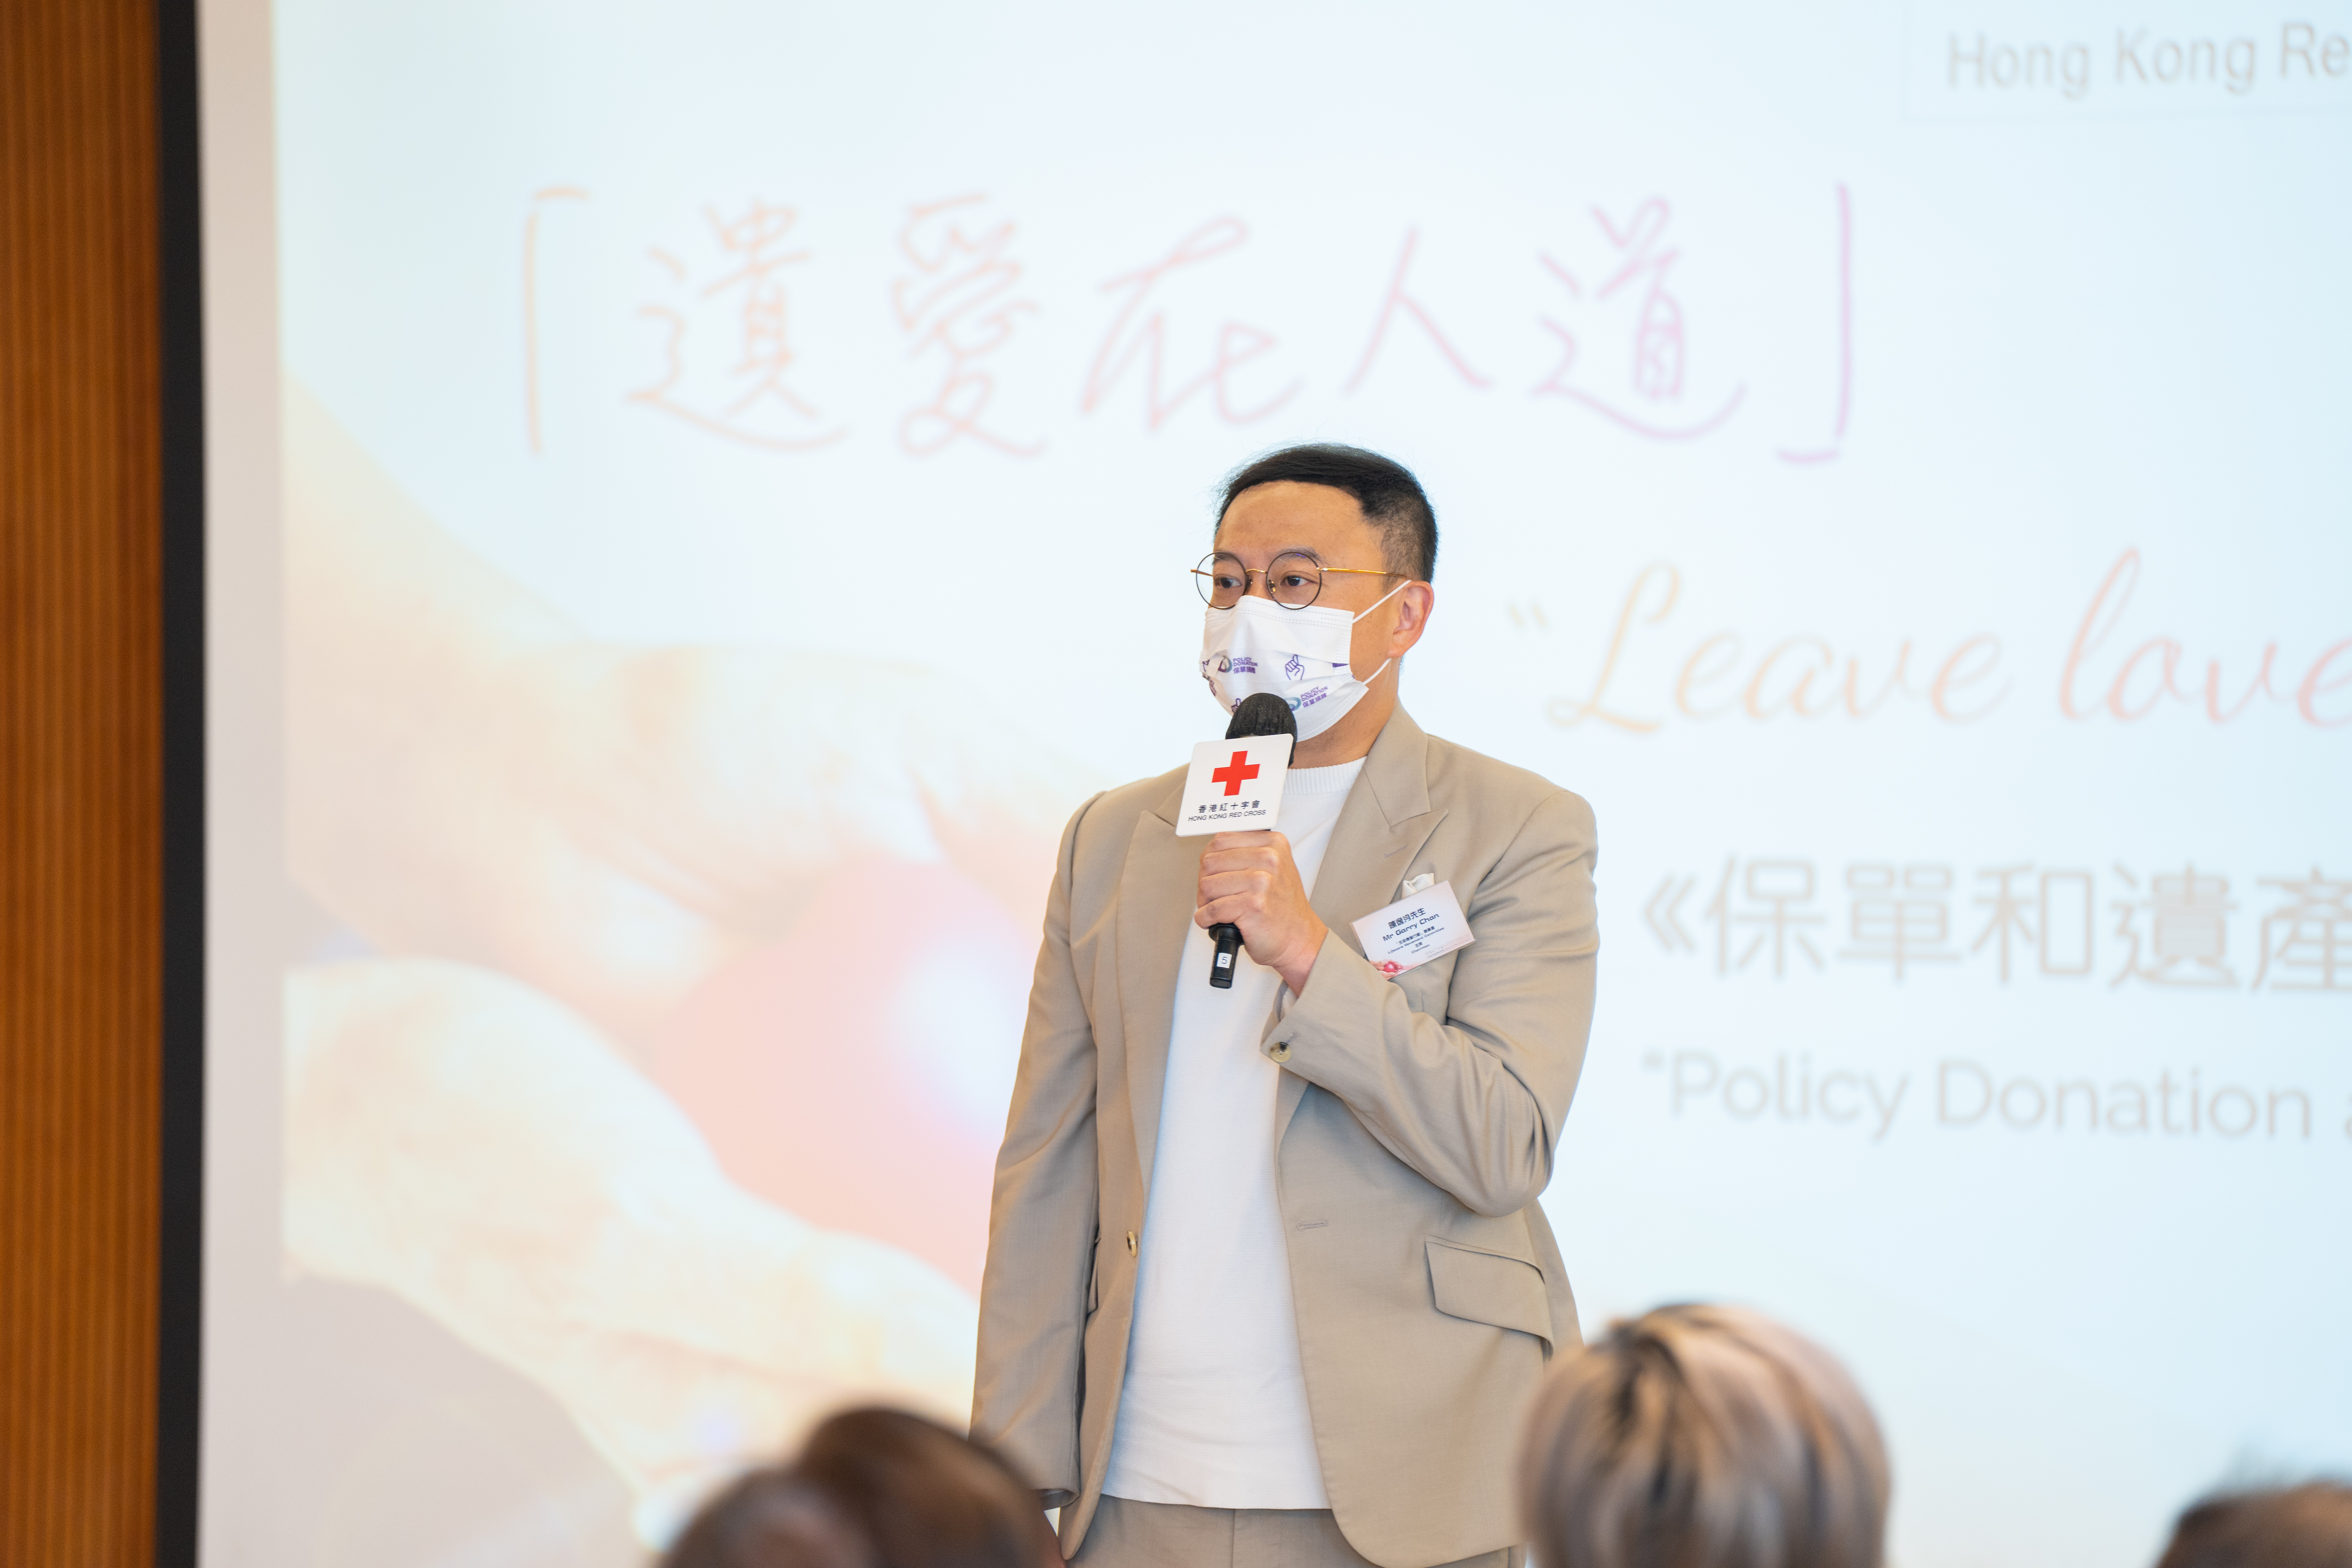 Mr. Garry Chan then shared about the ideals and potentials of "Policy Donation”. Simply by switching the beneficiary, the insured individuals can donate the life insurance death benefits to charitable organizations. 